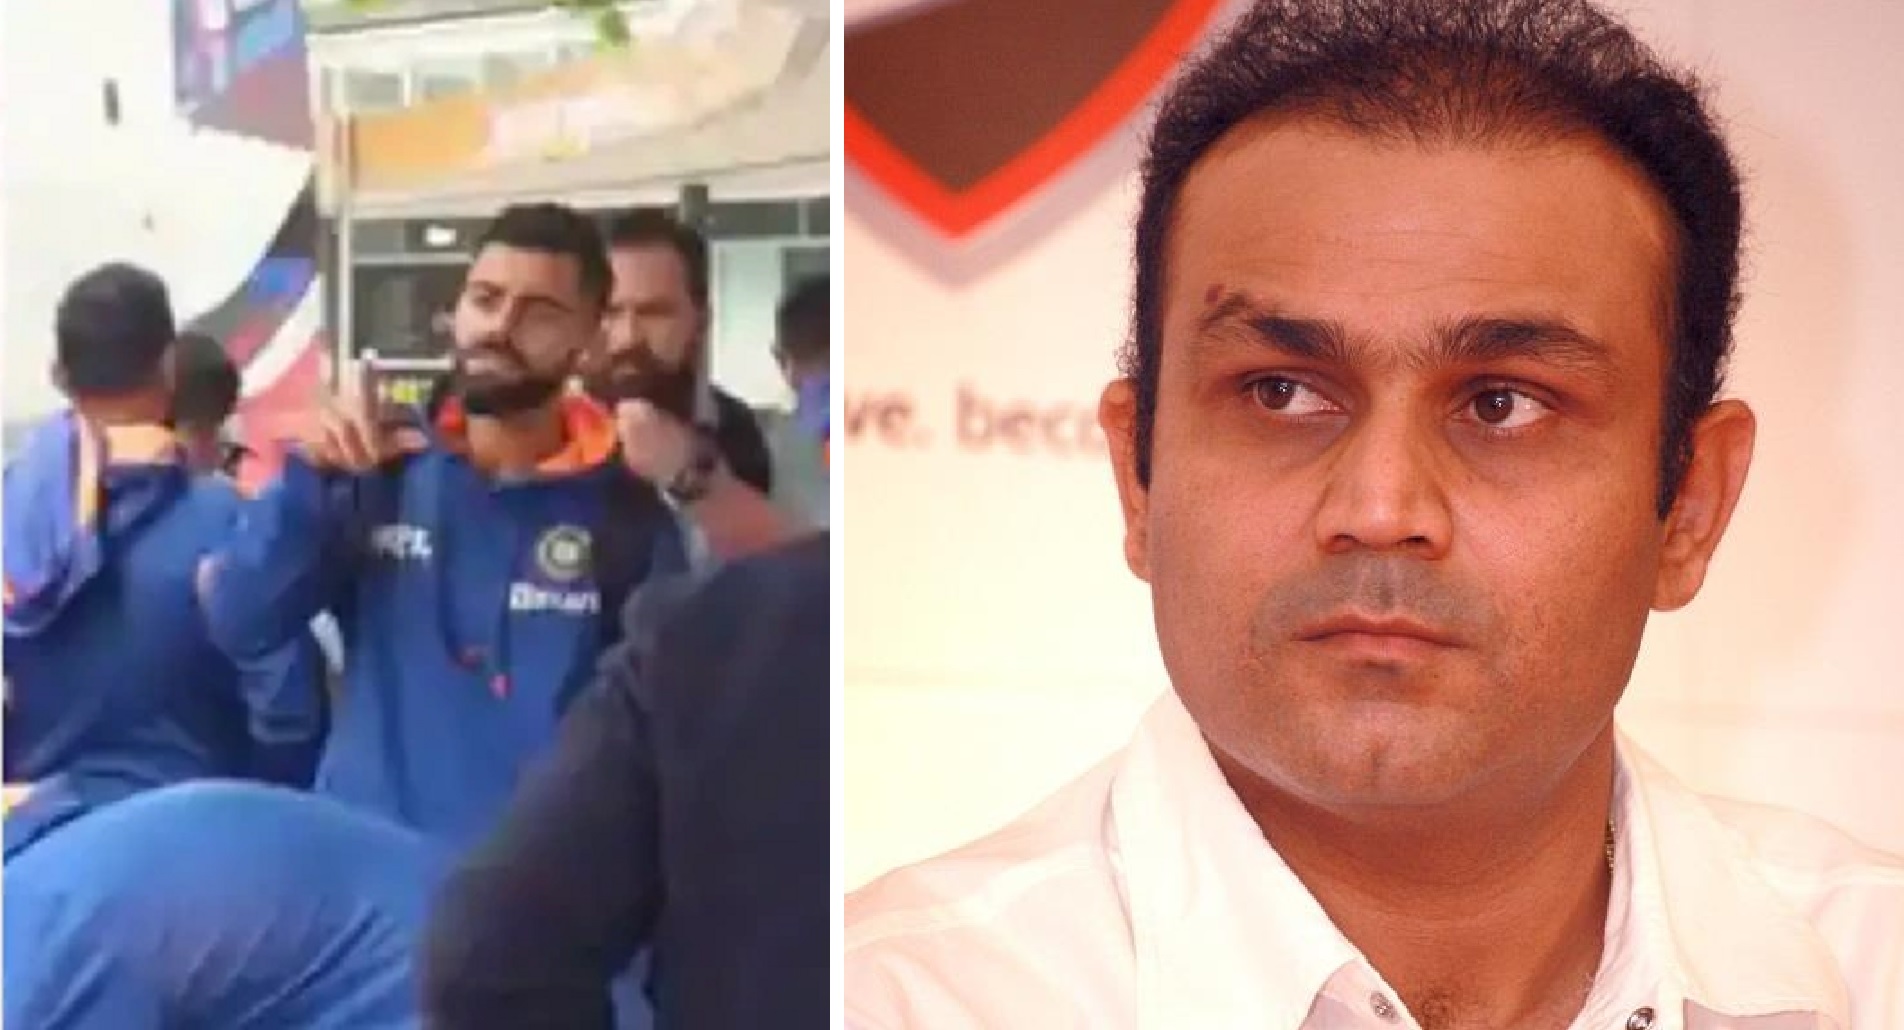 Sehwag reacts strongly after reports claimed that team India was served bad quality food in Sydney